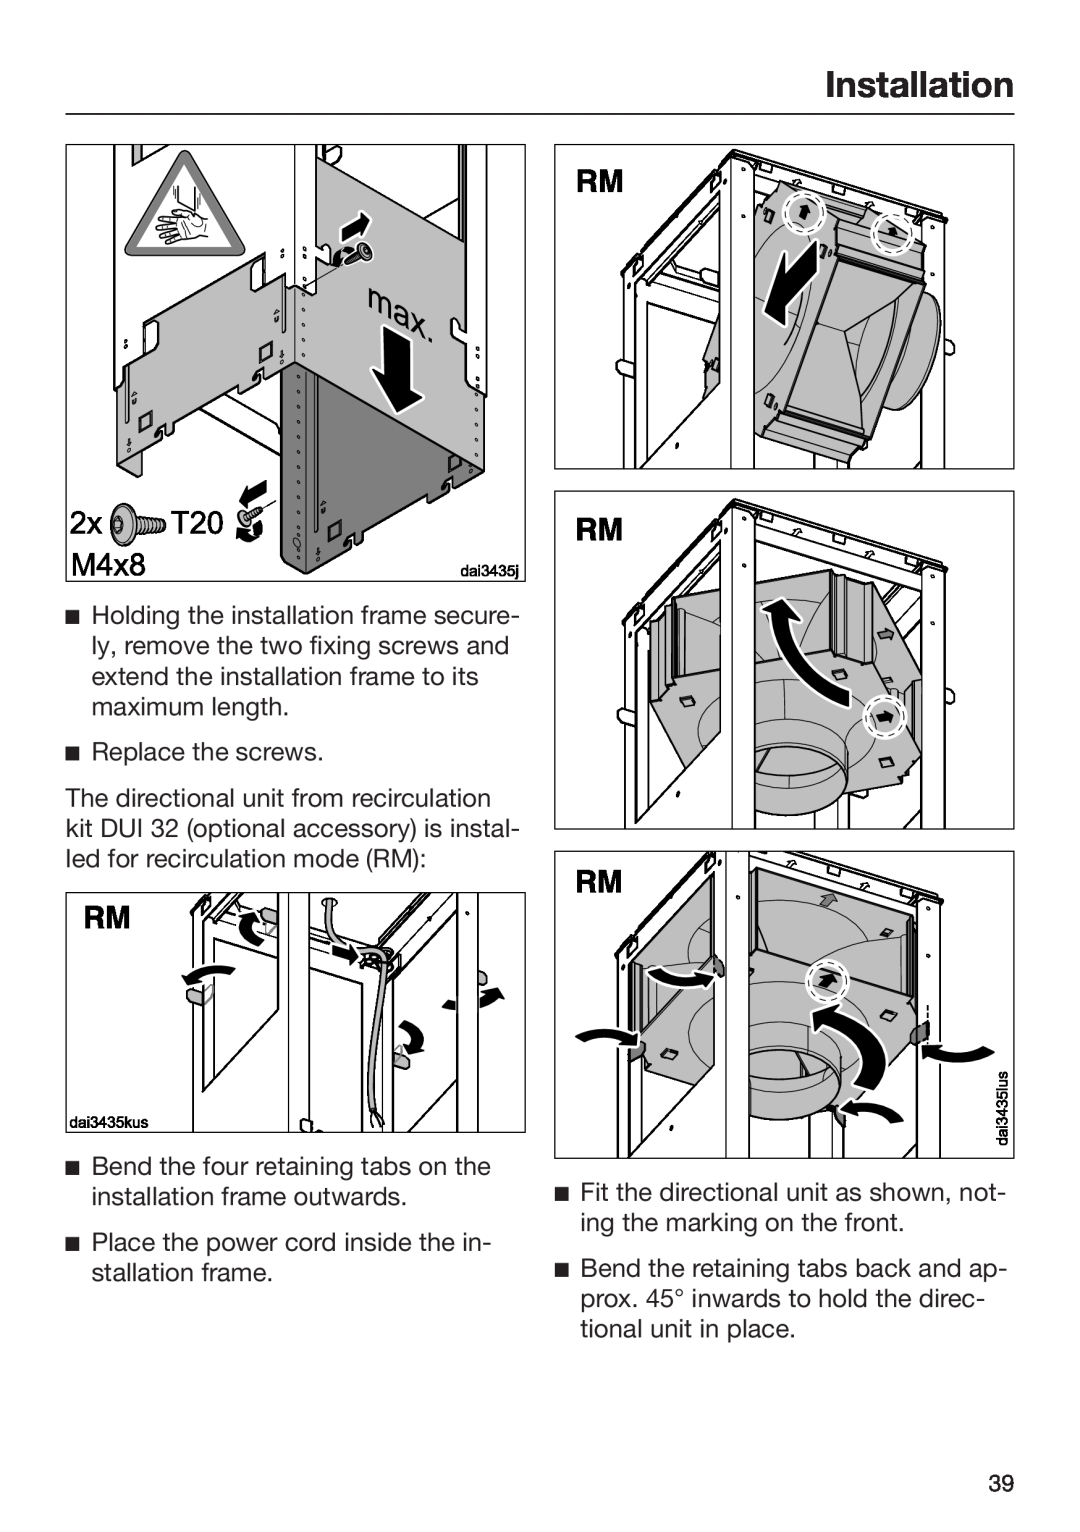 Miele M.-Nr. 09 805 980 installation instructions Installation, Replace the screws 